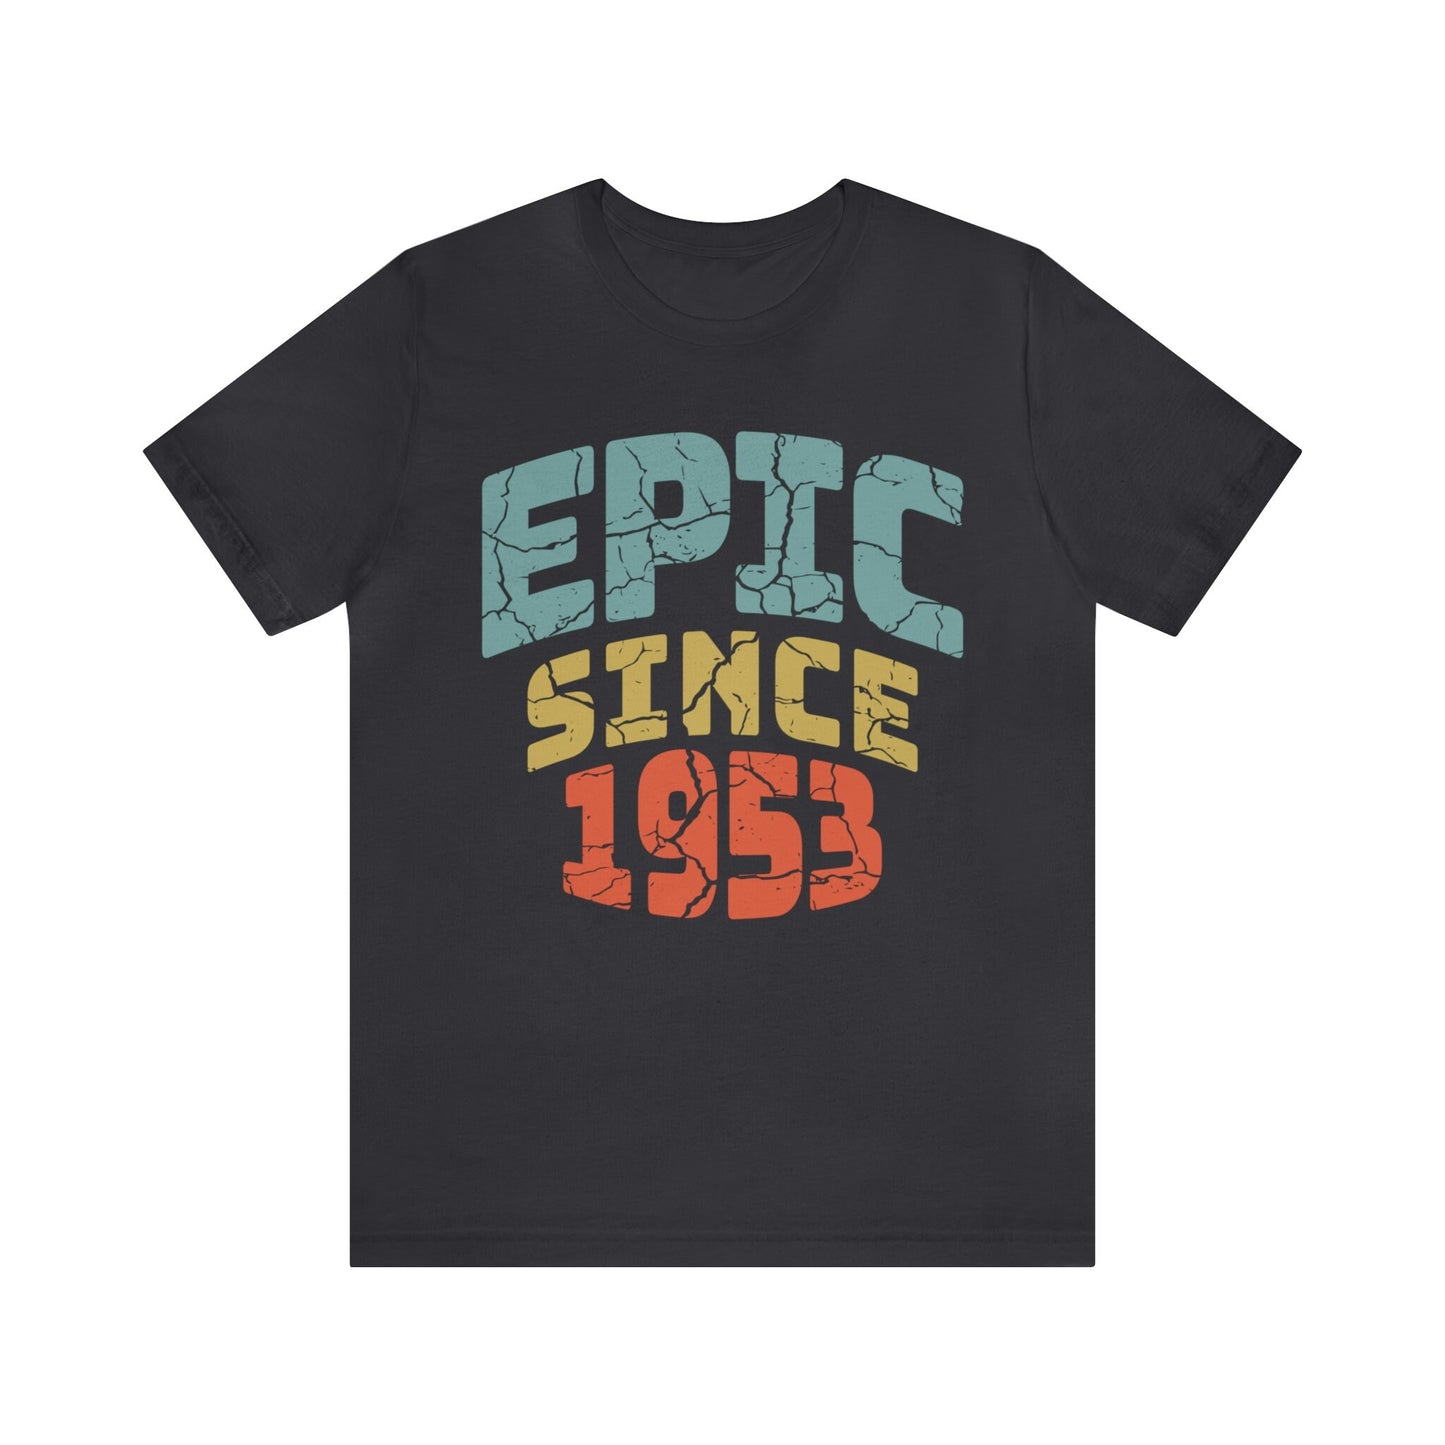 Epic Since 1953 birthday shirt for Men or Husband, Vintage Gift t-shirt for dad or father